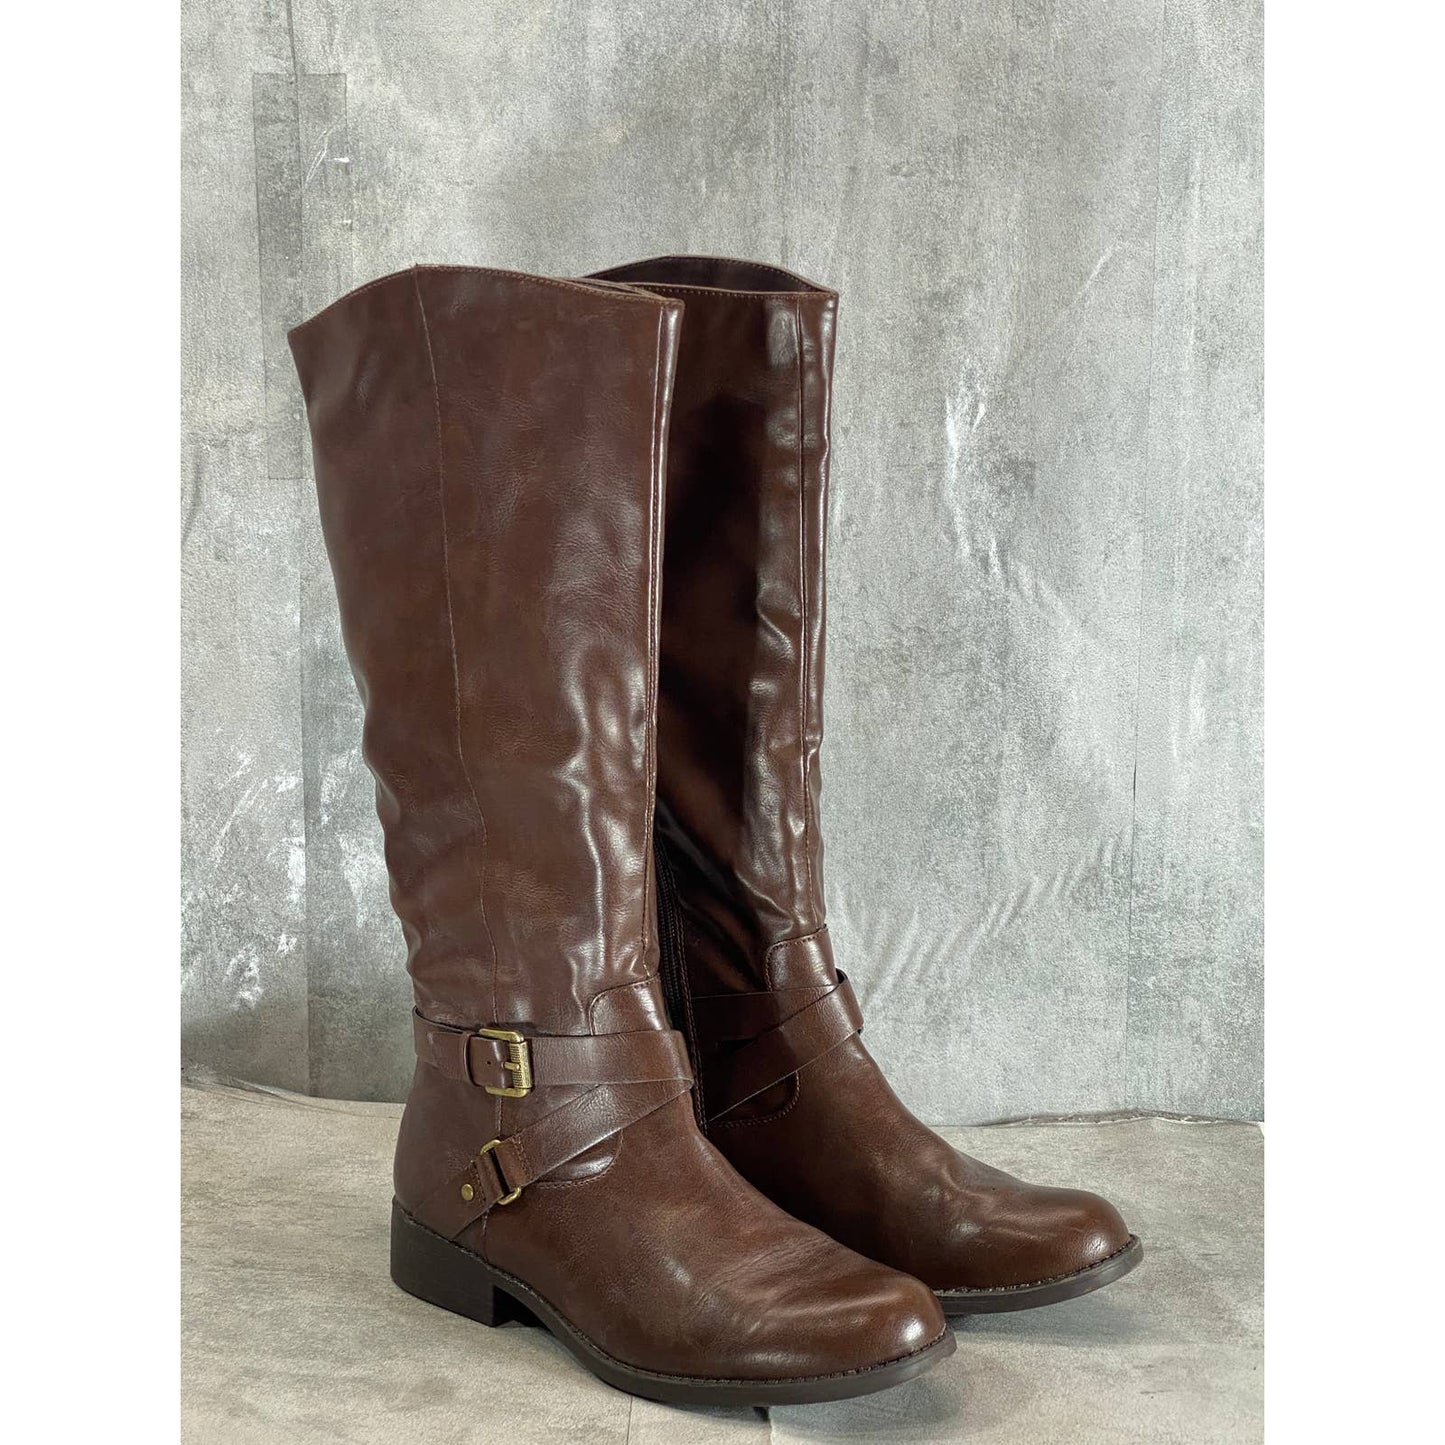 STYLE & CO Women's Cognac Marliee Full Side-Zip Round-Toe Tall Riding Boot SZ9.5